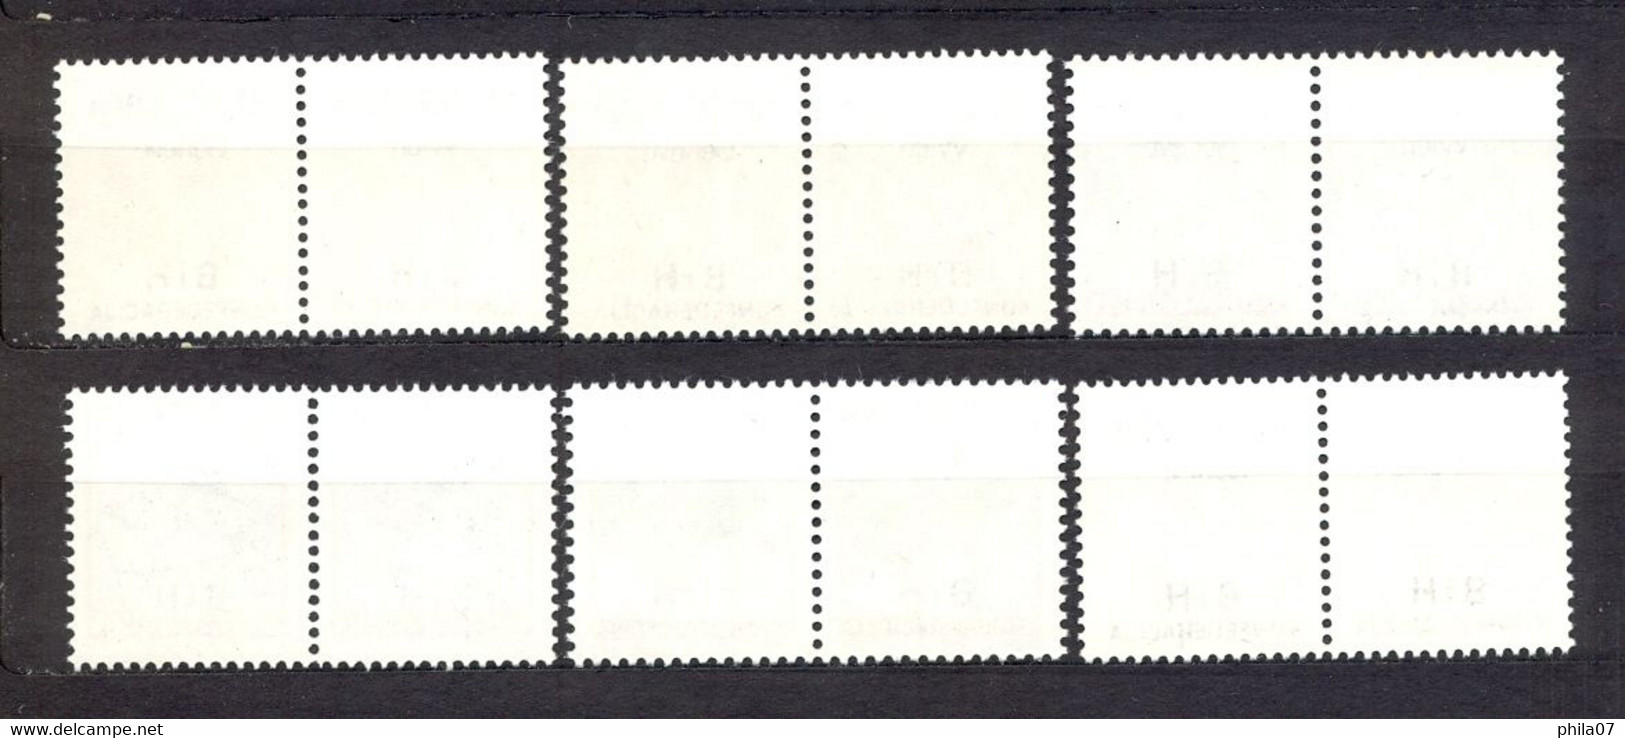 BOSNIA AND HERZEGOVINA War 1991-1995 - Overprint On Stamps Of Yugoslavia In Horizontal Pairs And In Two Type, Private Is - Bosnie-Herzegovine